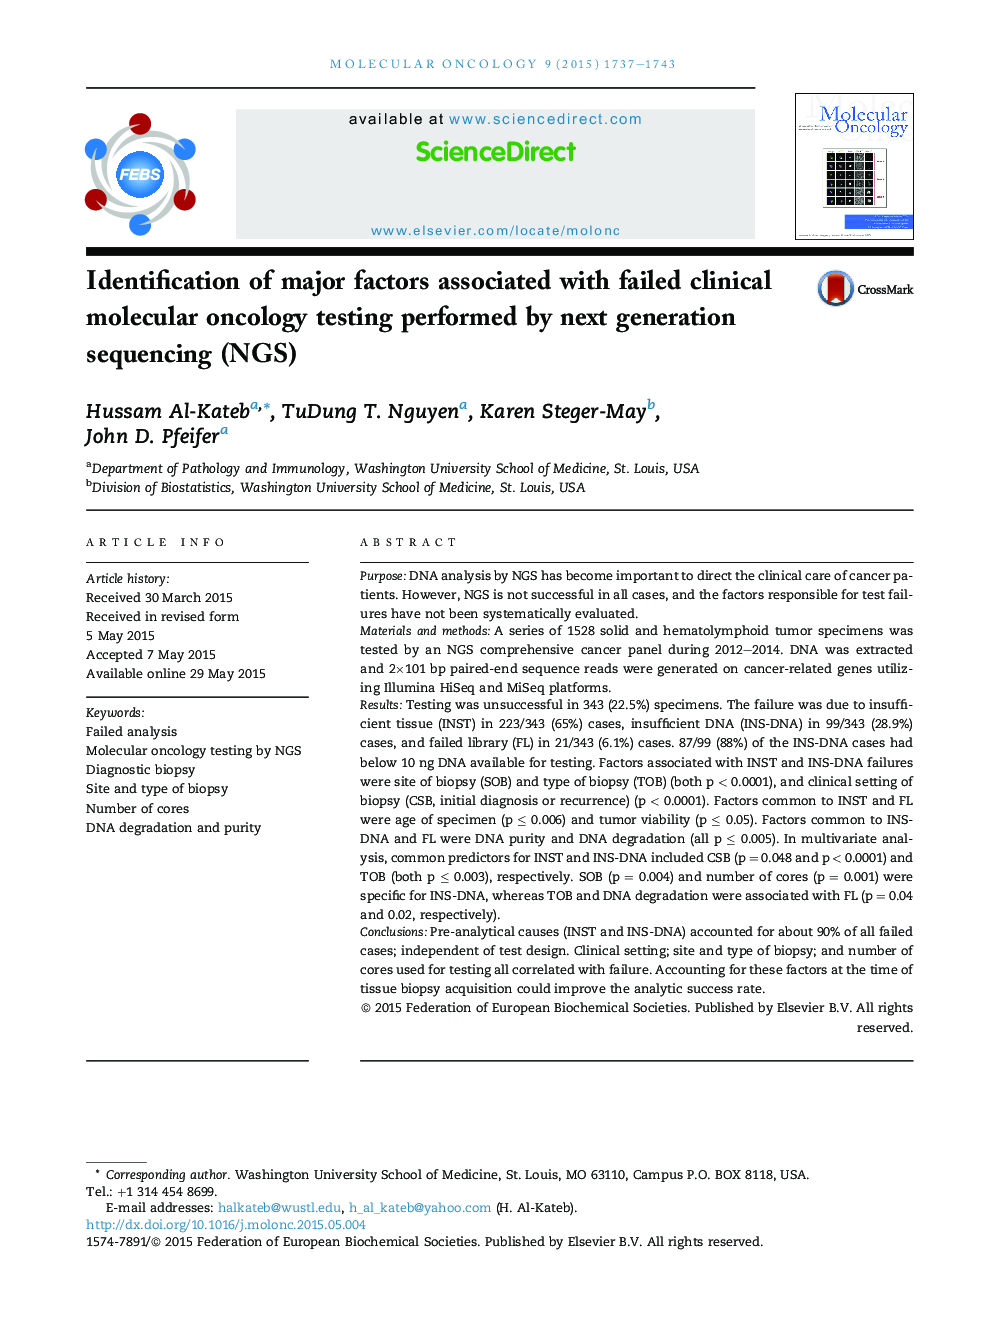 Identification of major factors associated with failed clinical molecular oncology testing performed by next generation sequencing (NGS)